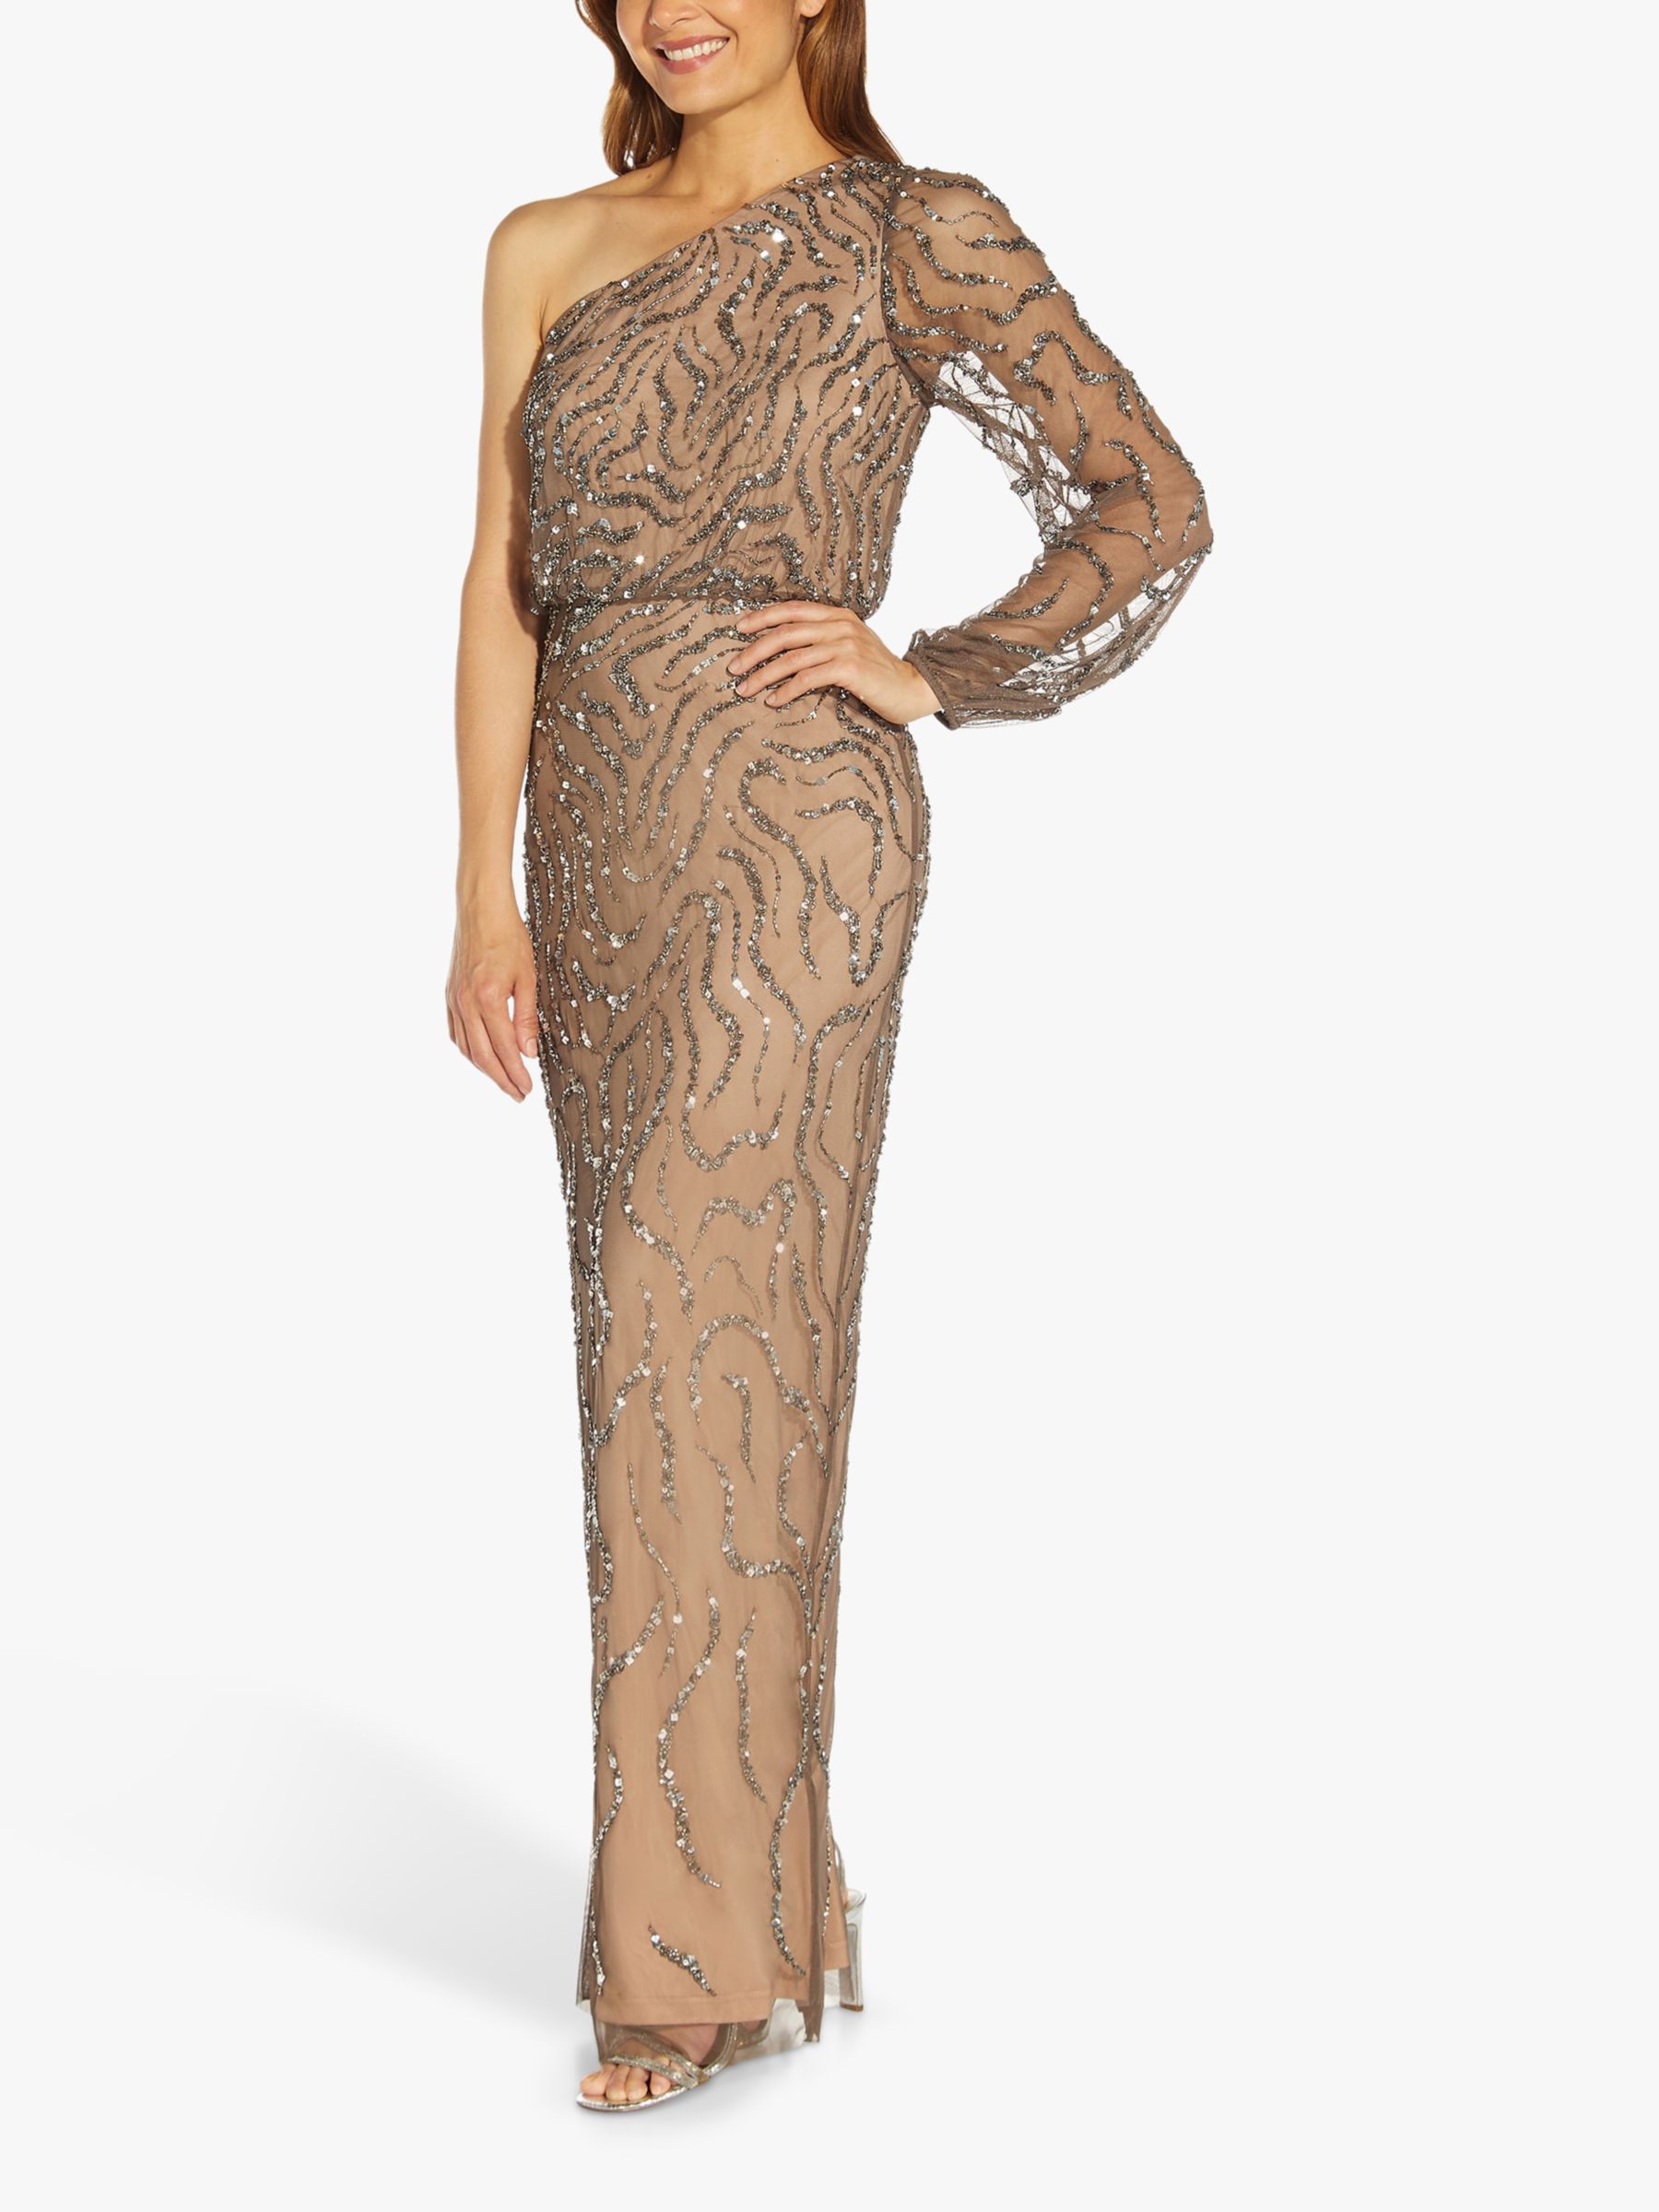 Adrianna Papell One Shoulder Long Beaded Dress, Nude/Lead